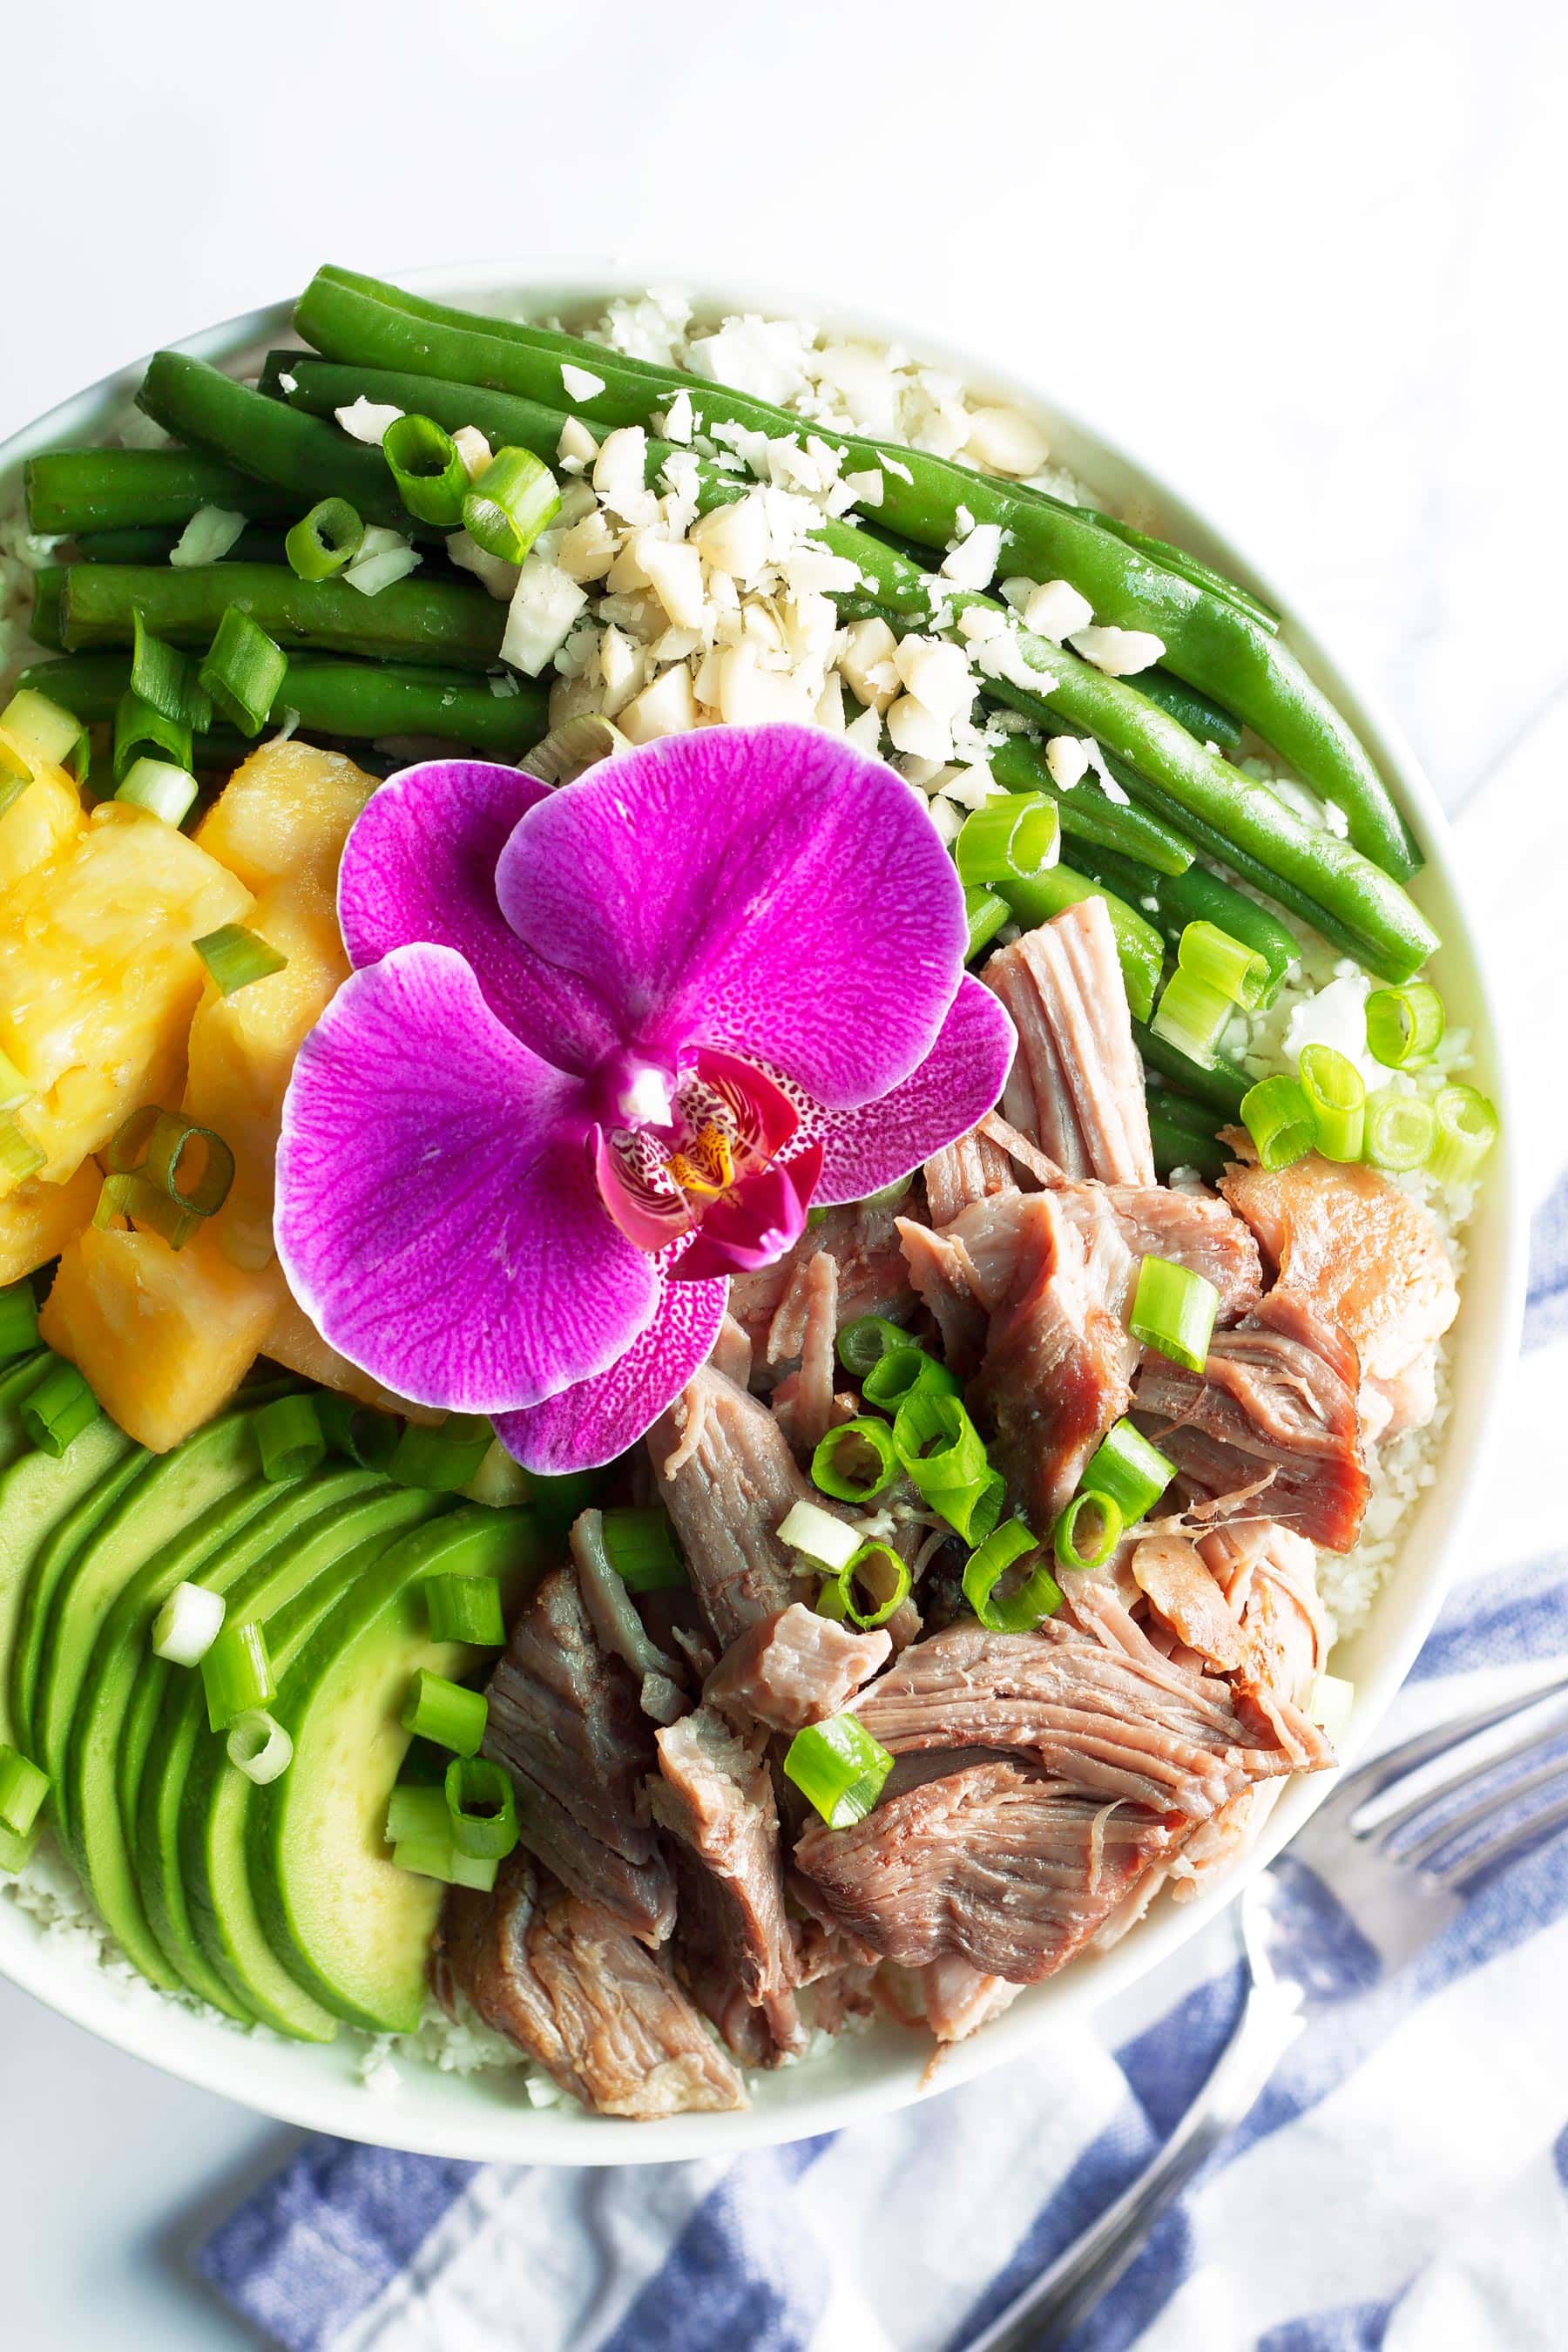 Tender, succulent Kalua pork made right in the Instant Pot! This #Whole30 and #paleo dinner recipe only takes 10 mins of prep time and is great for meal prep! These bowls are made with pork shoulder, pineapple, avocado, long beans, green onion, and macadamia nuts. All on a bed of delicious cauliflower rice! #paleodinner #whole30dinner #instantpot #whole30instantpot #kaluapig #kaluapork #healthyeating #healthydinner #mealprep #mealprepideas #pineapple #hawaiianrecipes #whole30recipes #instantpotrecipes #paleorecipes #glutenfreedinner #macadamianuts #cauliflowerrice